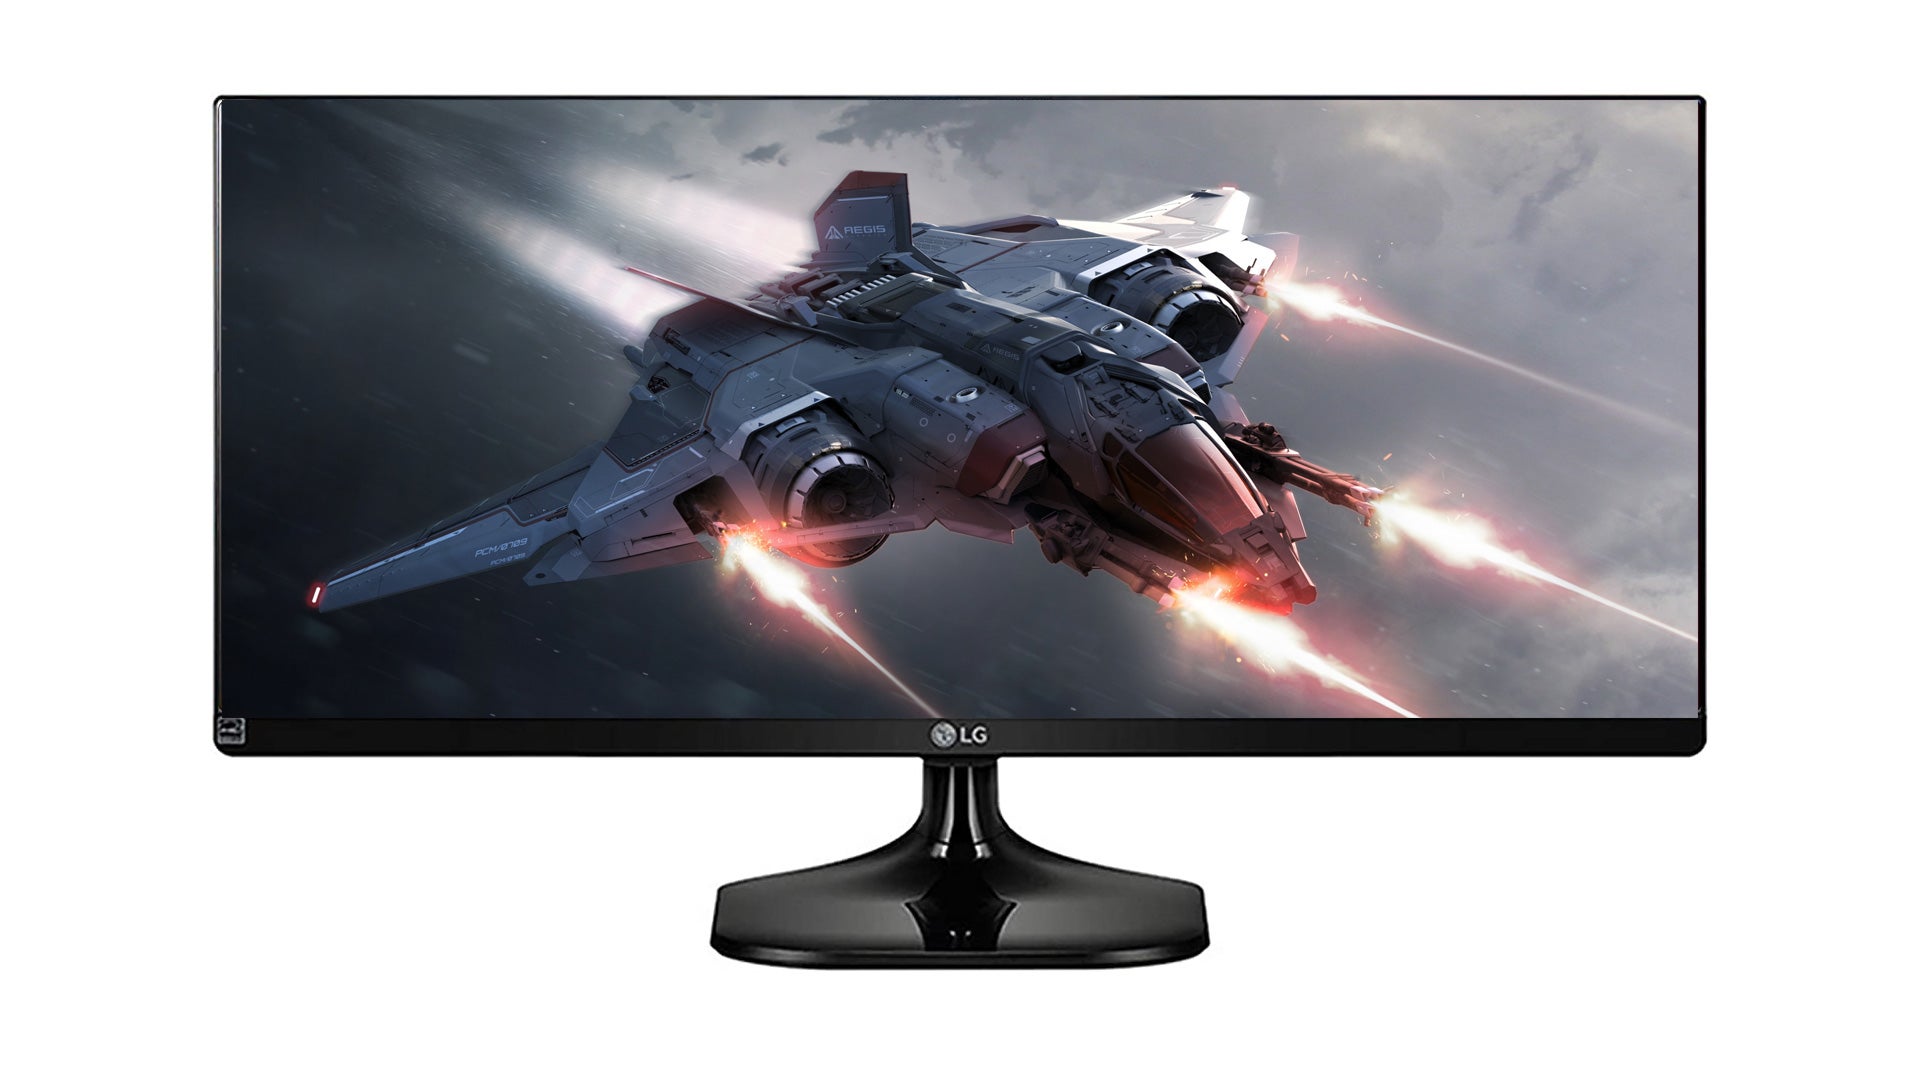 a futuristic spaceship fires lasers on an ultrawide monitor, although the bezels of the monitor appear too small to be realistic.